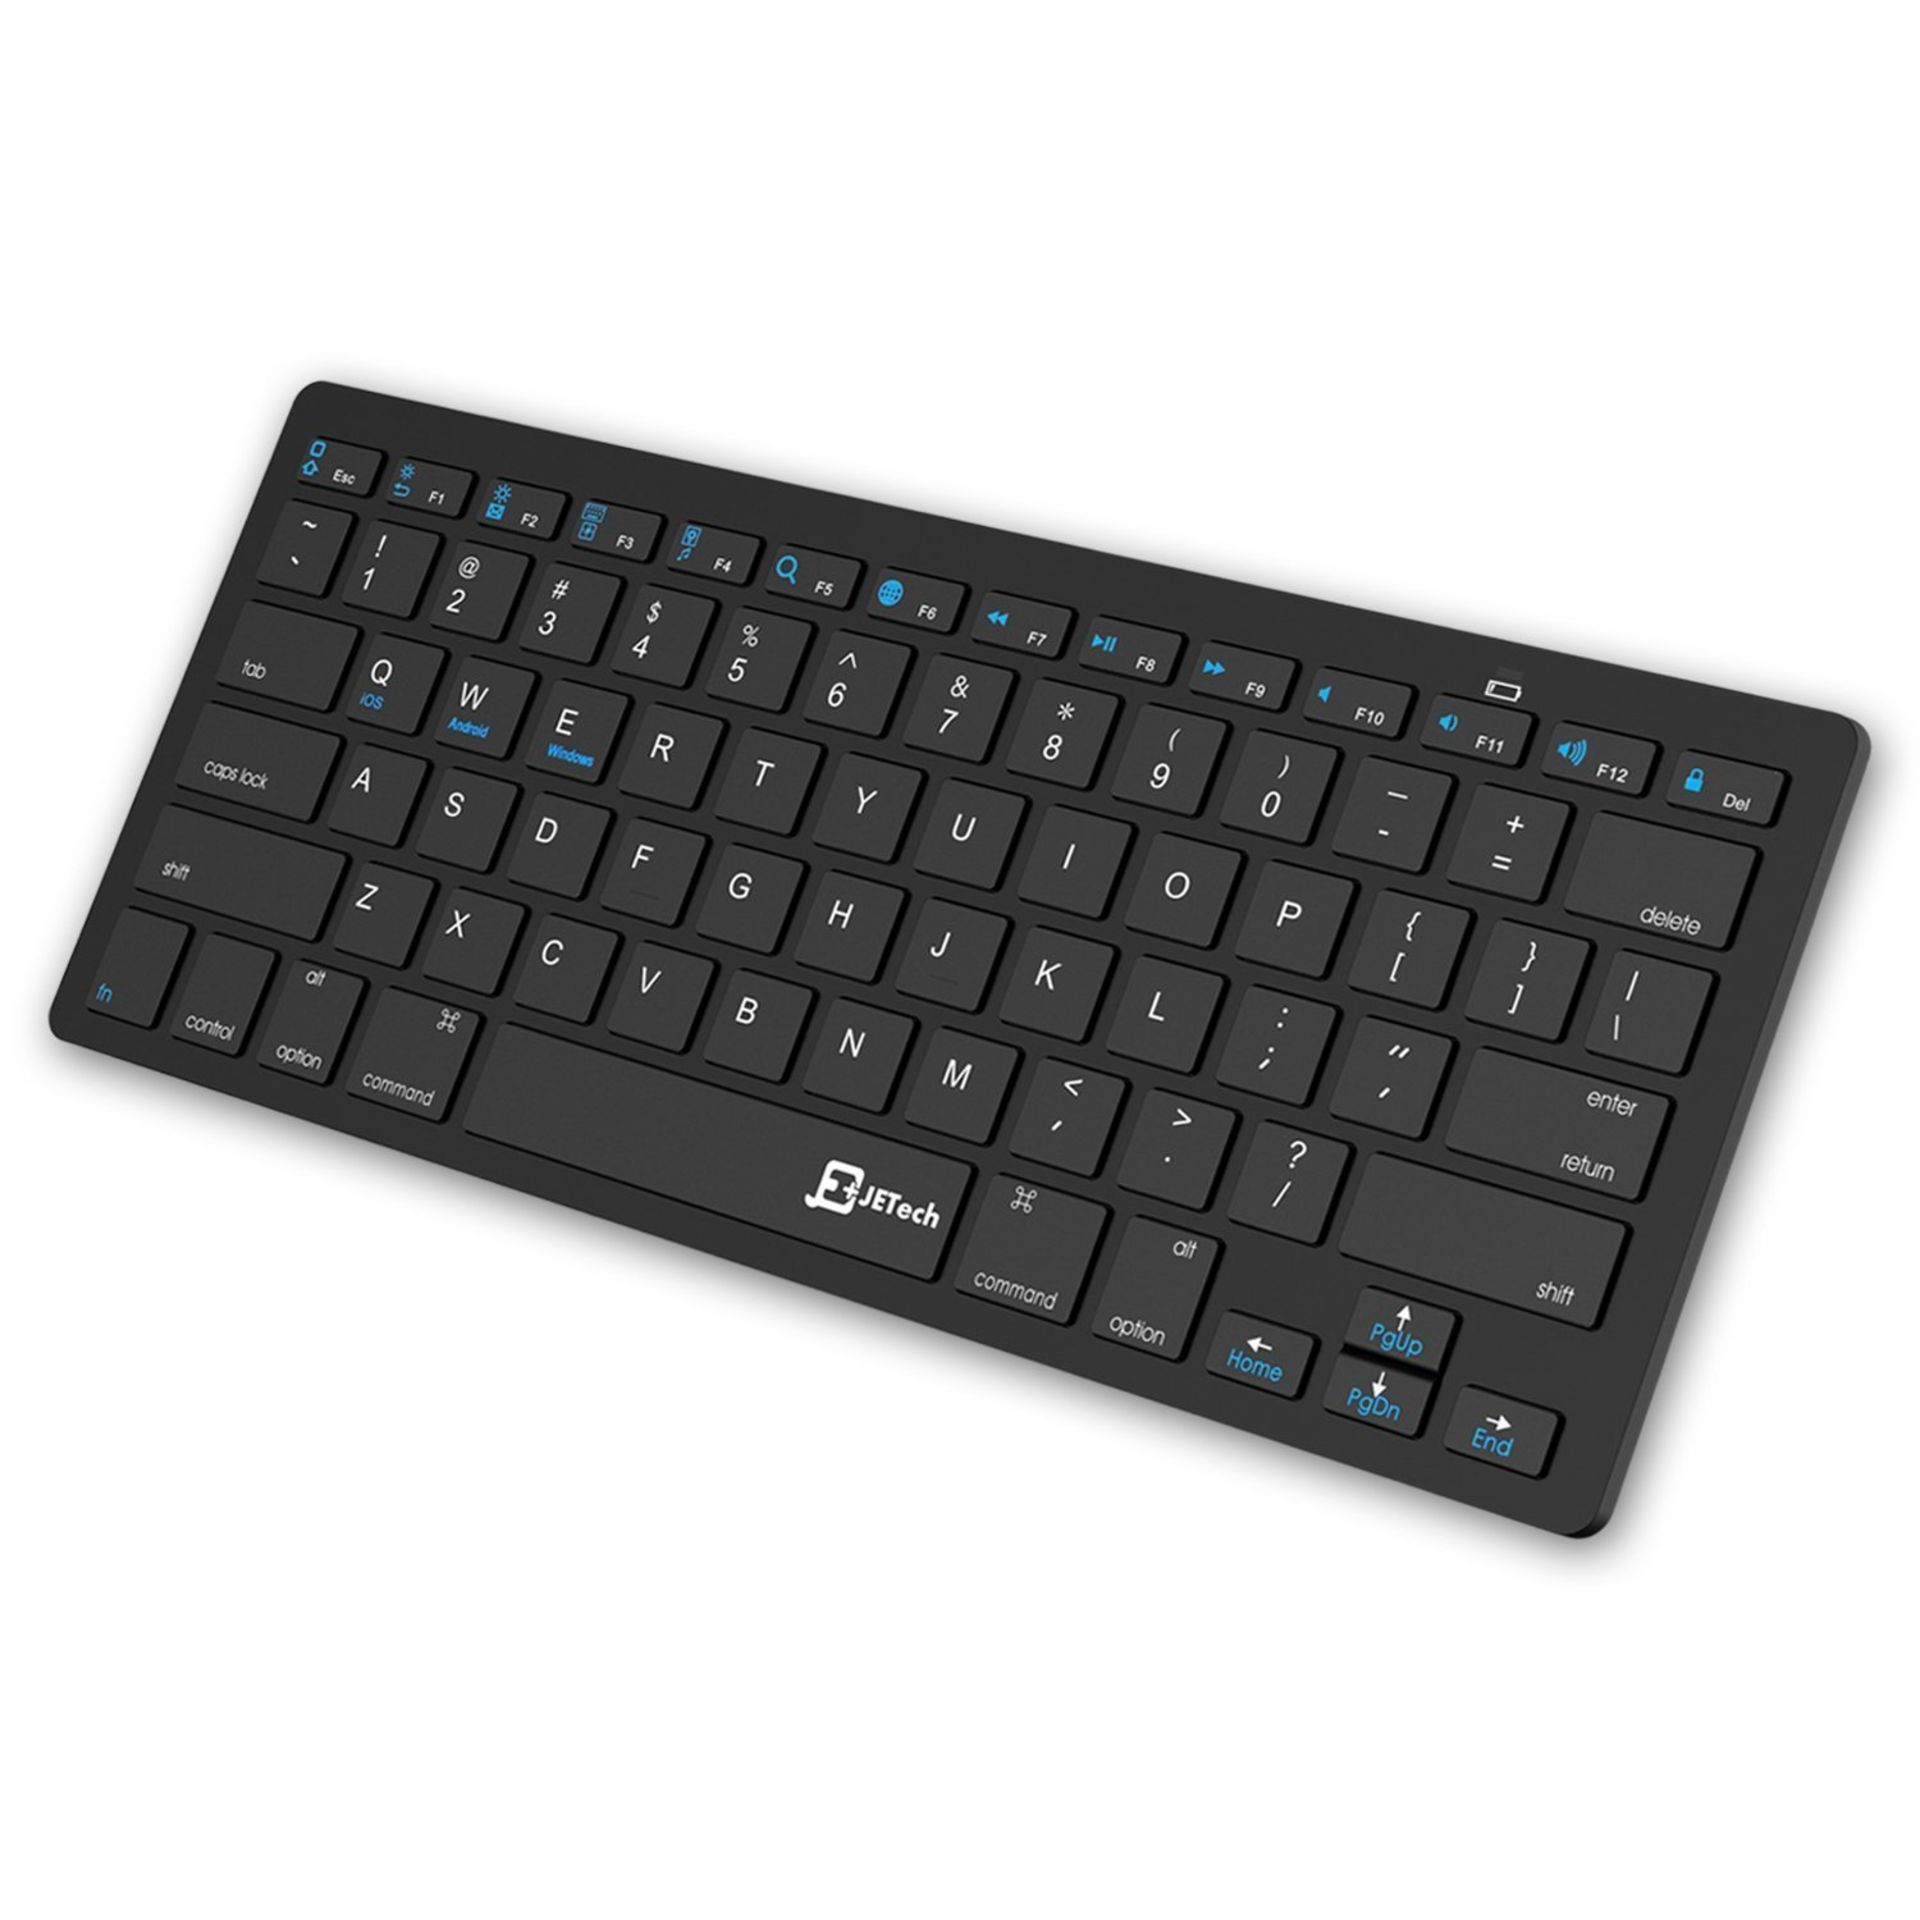 V Grade A Bluetooth Qwerty Keyboard Icluding Wireless Receiver Amazon Price £9.95 X 2 YOUR BID PRICE